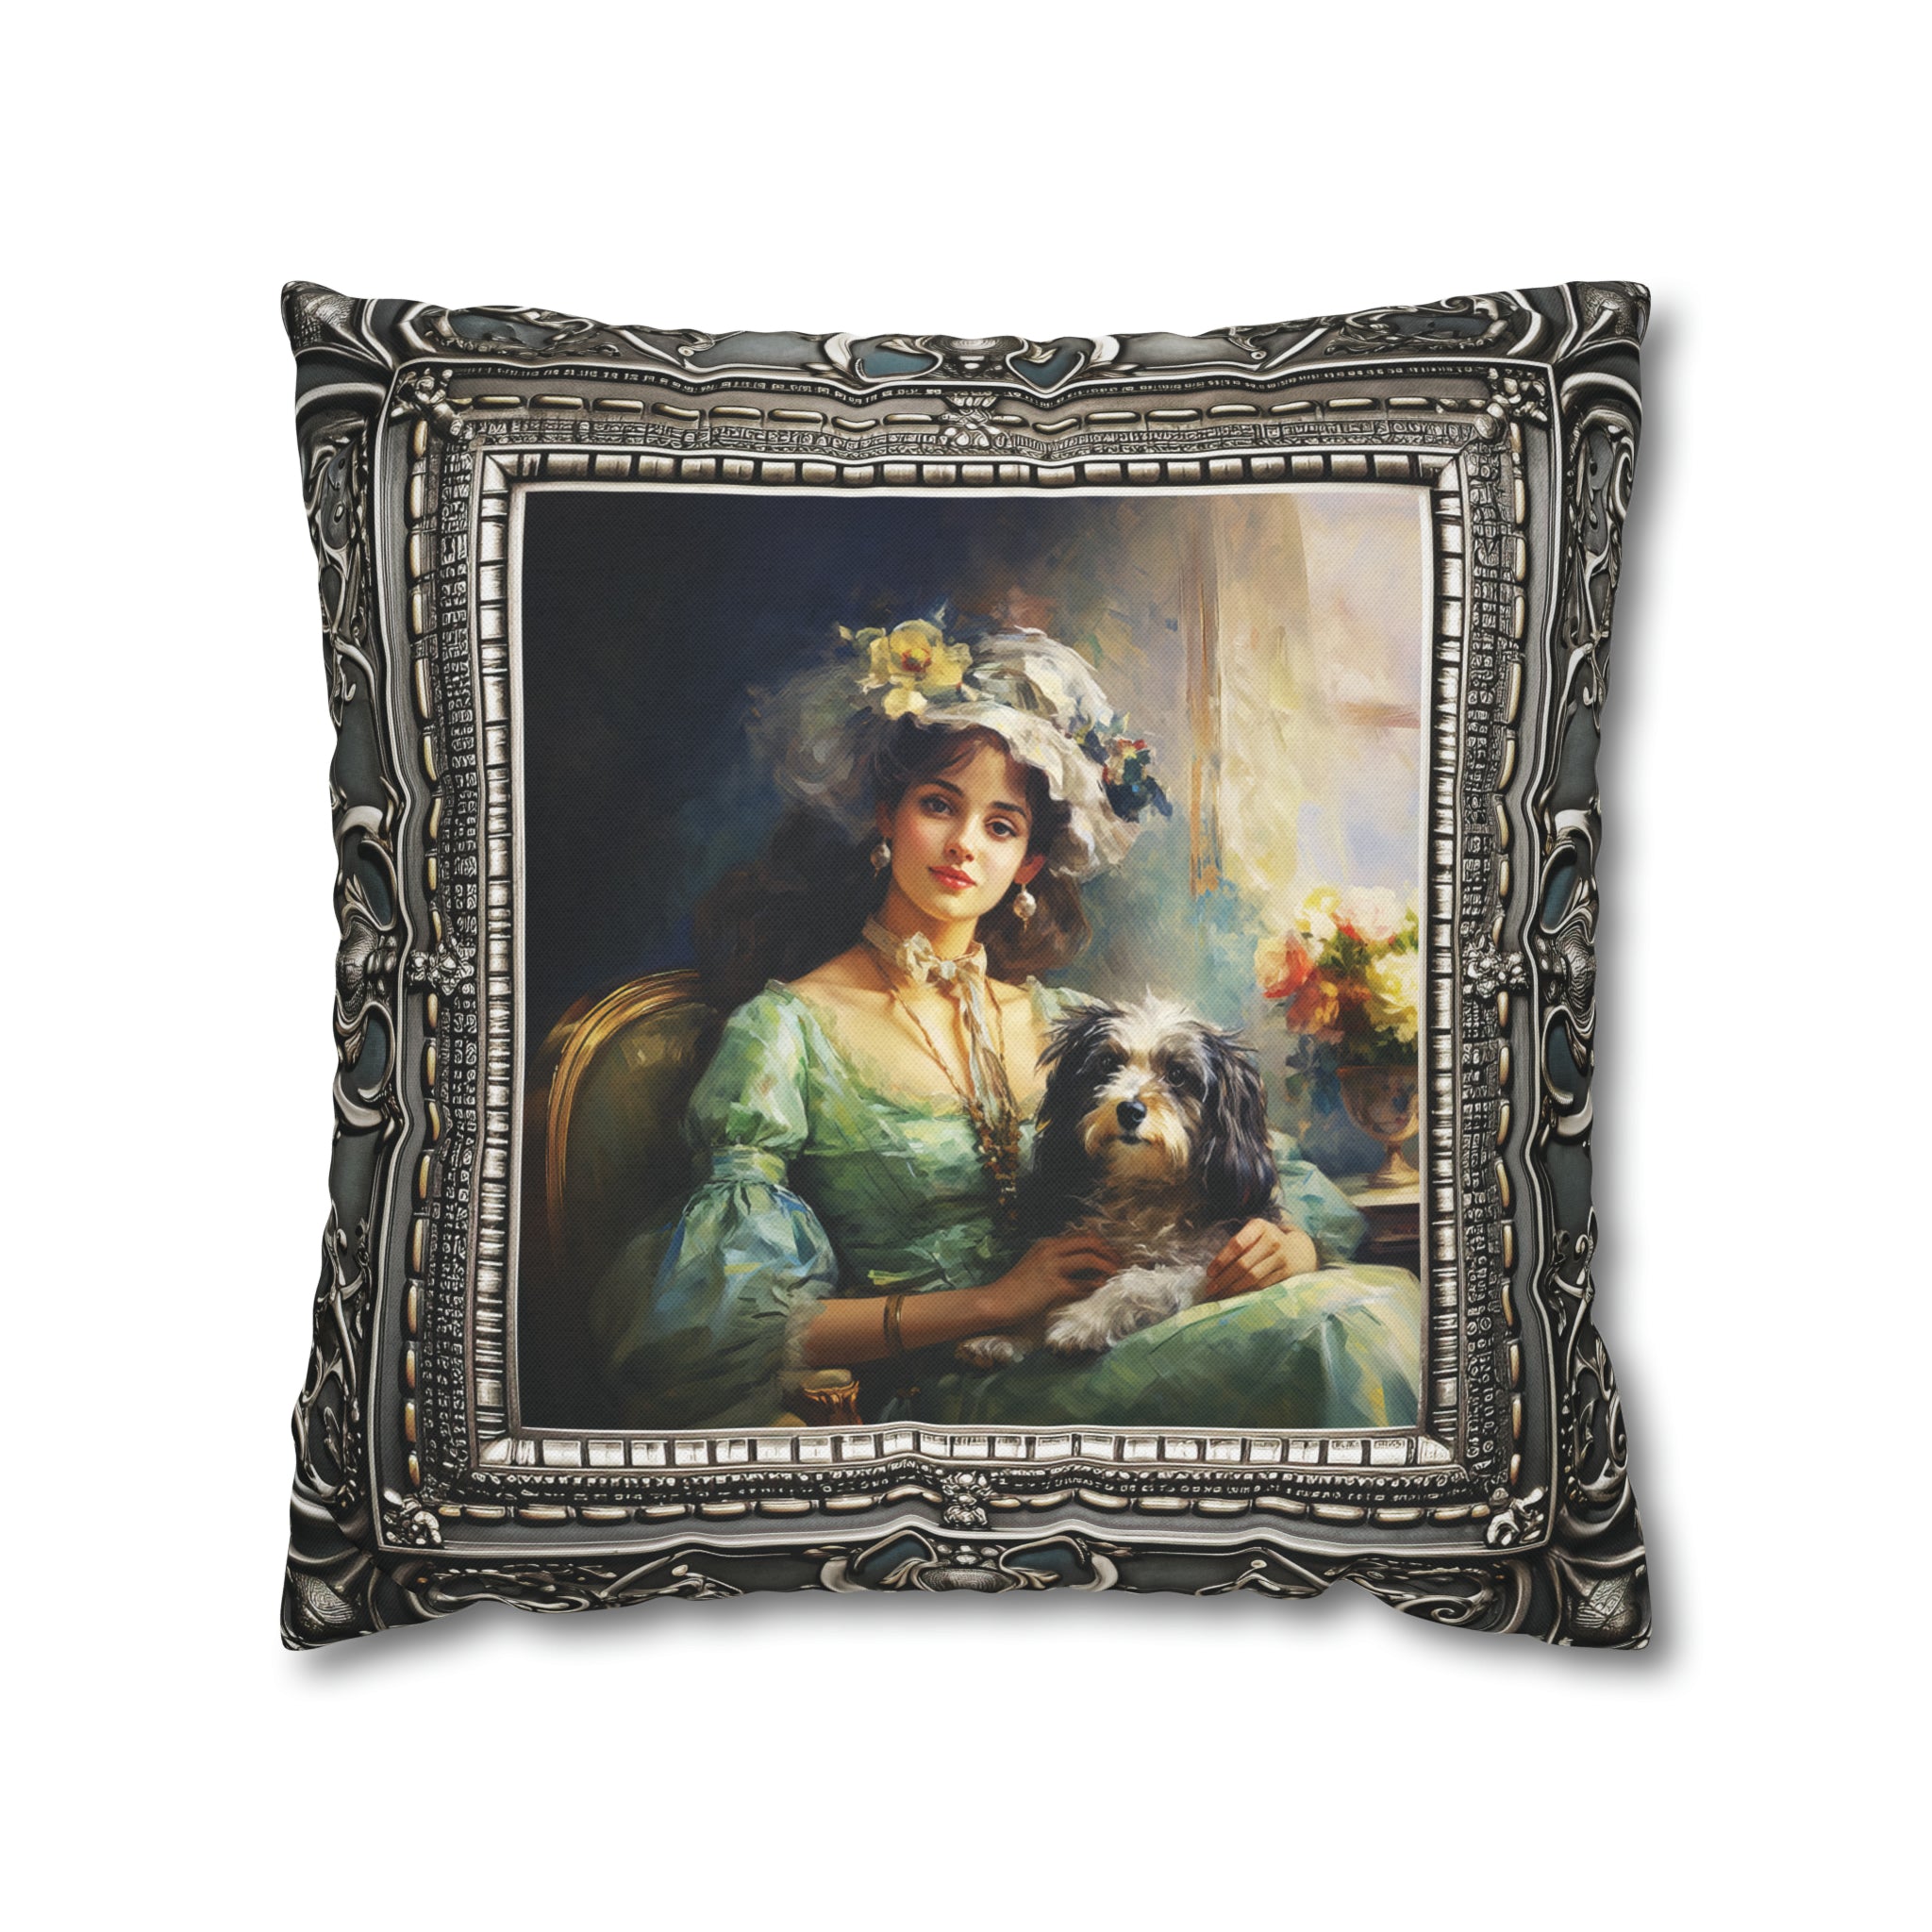 Square Pillow Case 18" x 18", CASE ONLY, no pillow form, original Art , a Painting of a Young Woman and her Dog in an Antique Frame